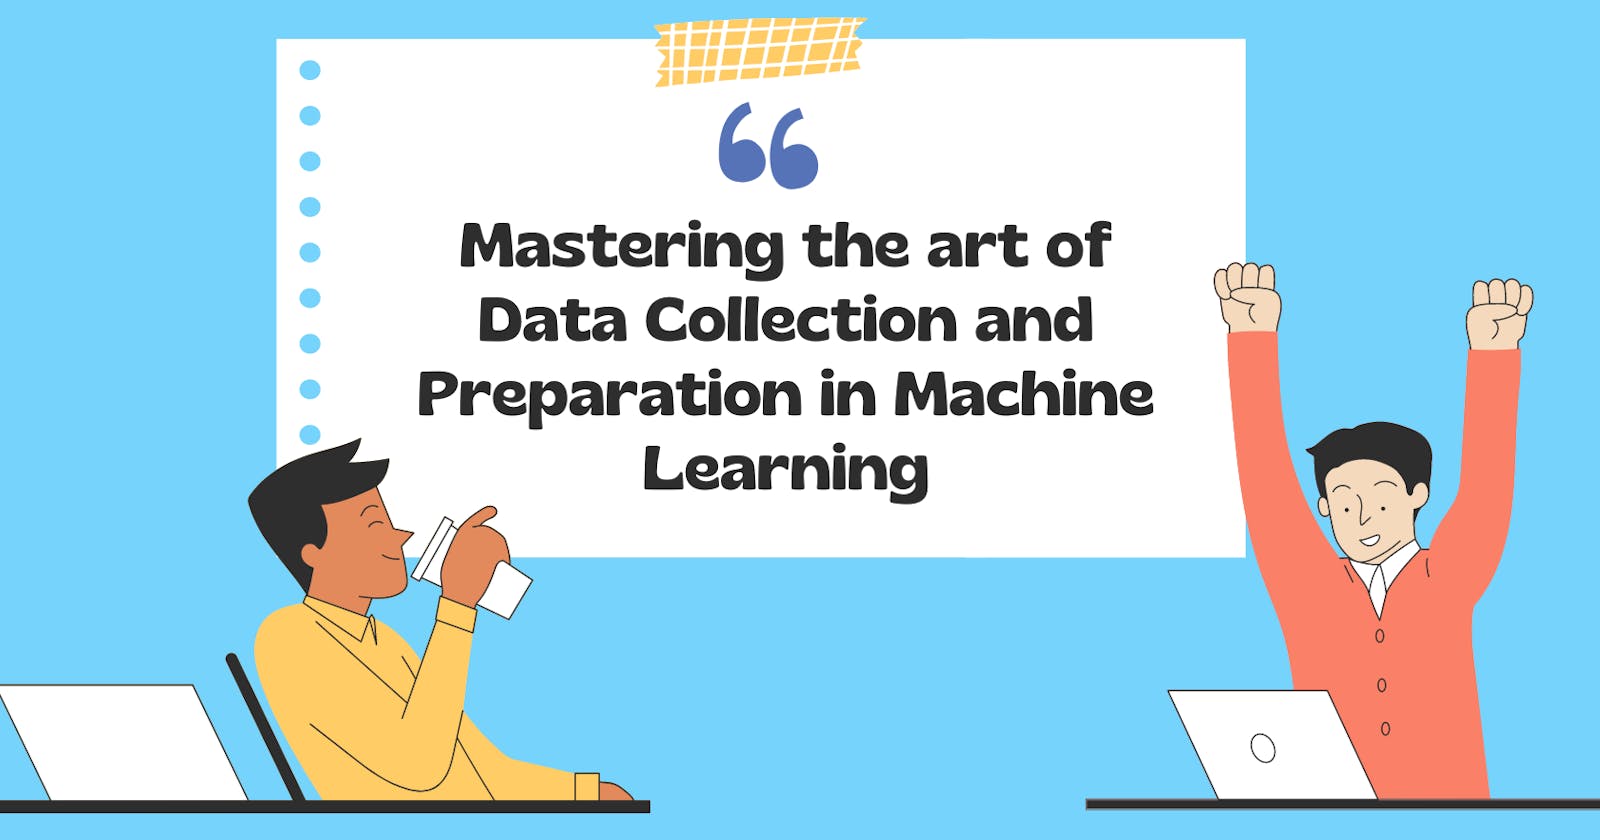 Mastering the Art of Data Collection and Preparation in Machine Learning